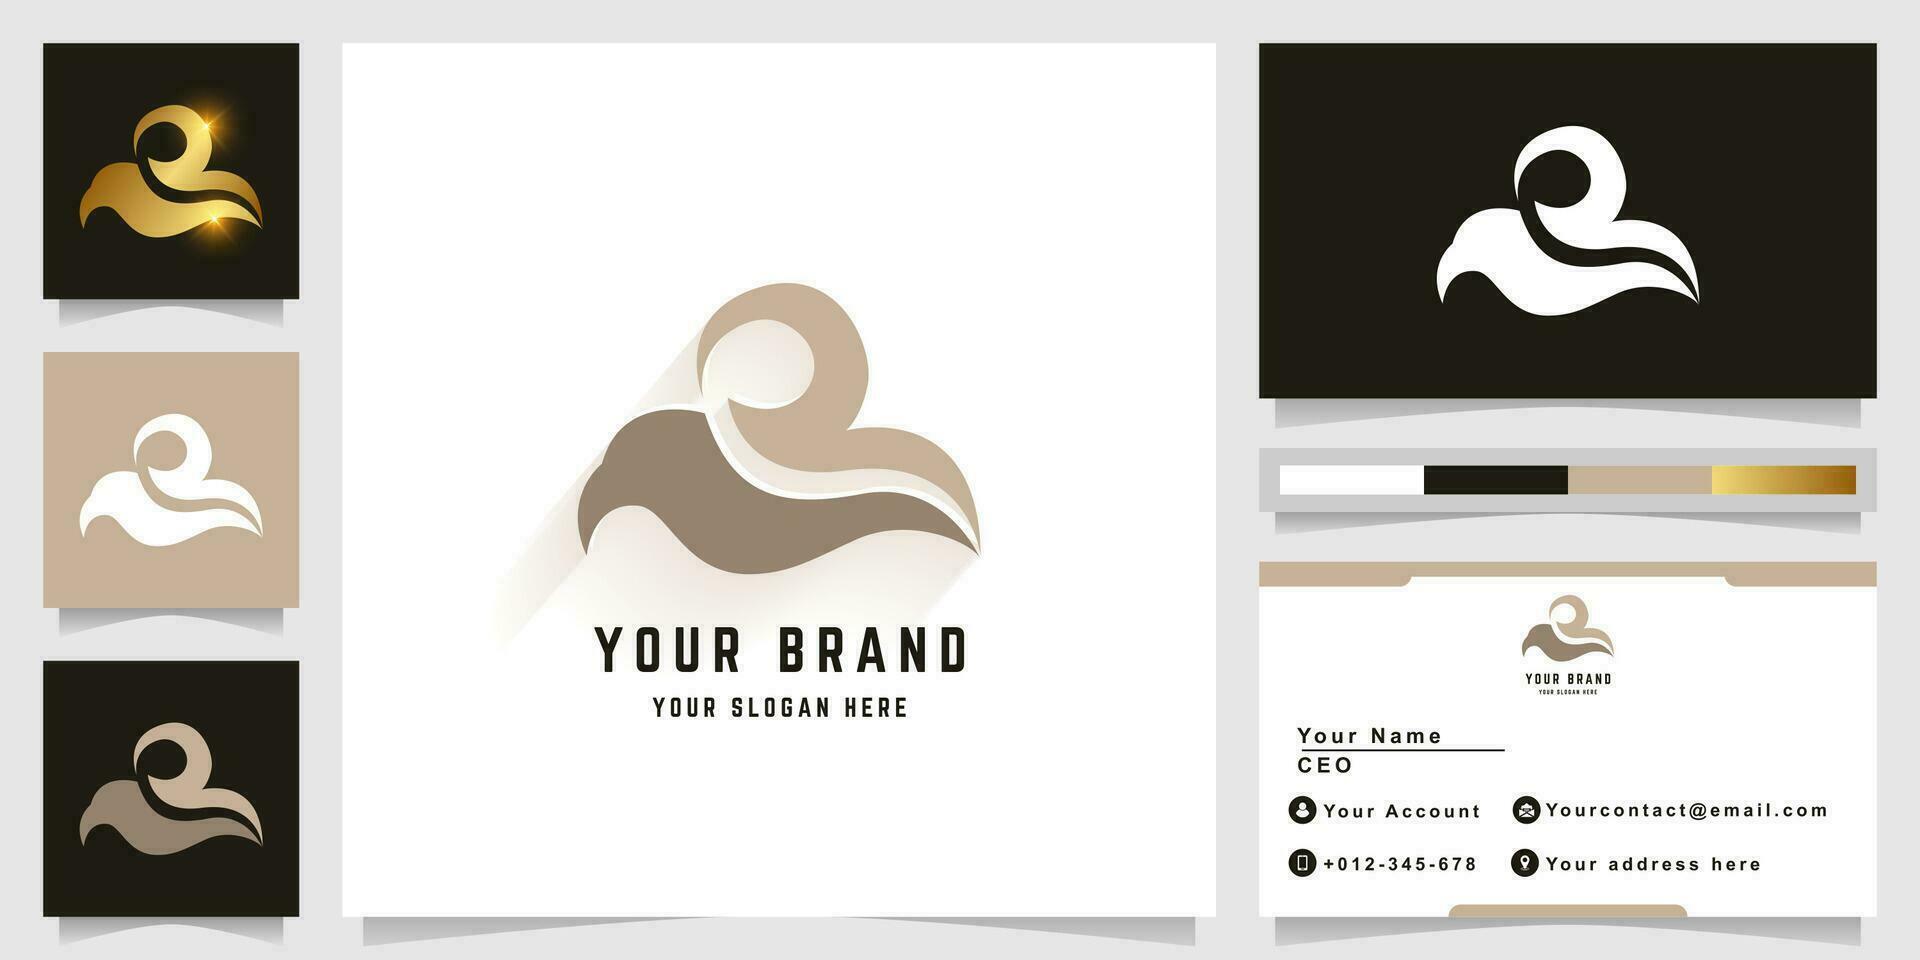 Letter e like bird or cloud logo with business card design vector